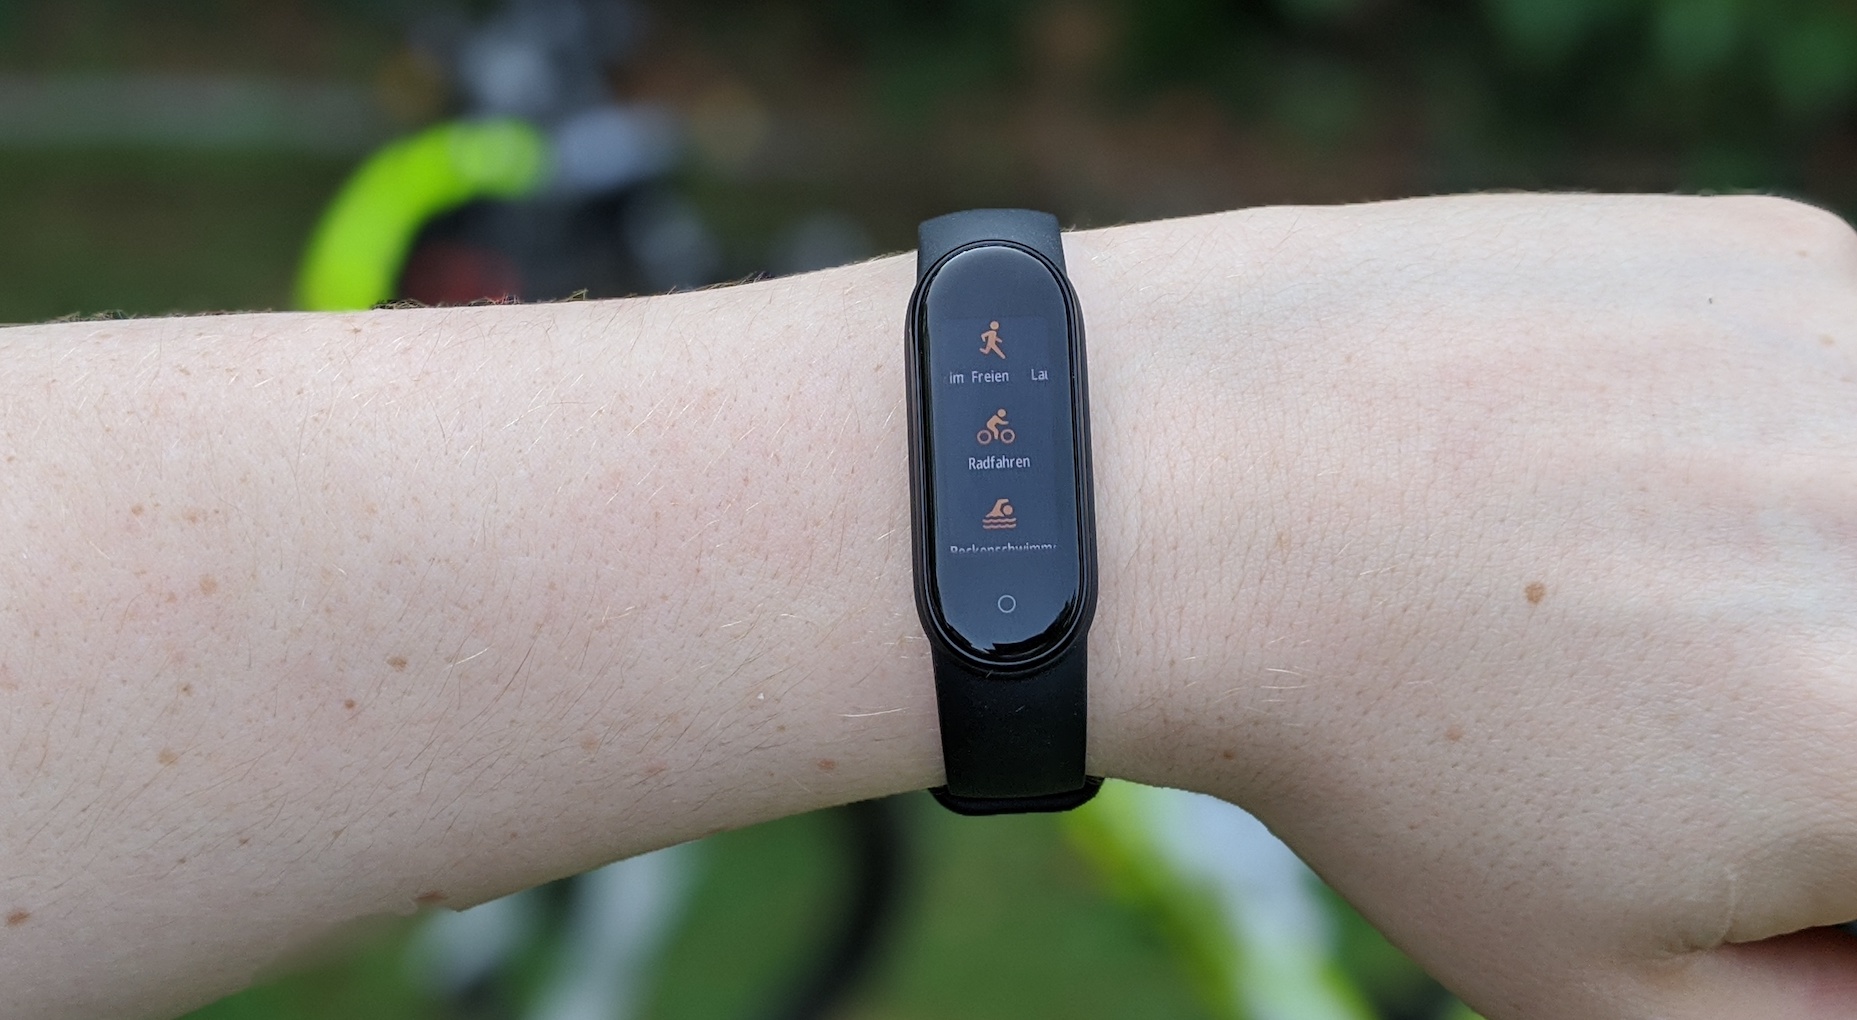 Xiaomi Mi Band 5 fitness tracker in practical test: What can the